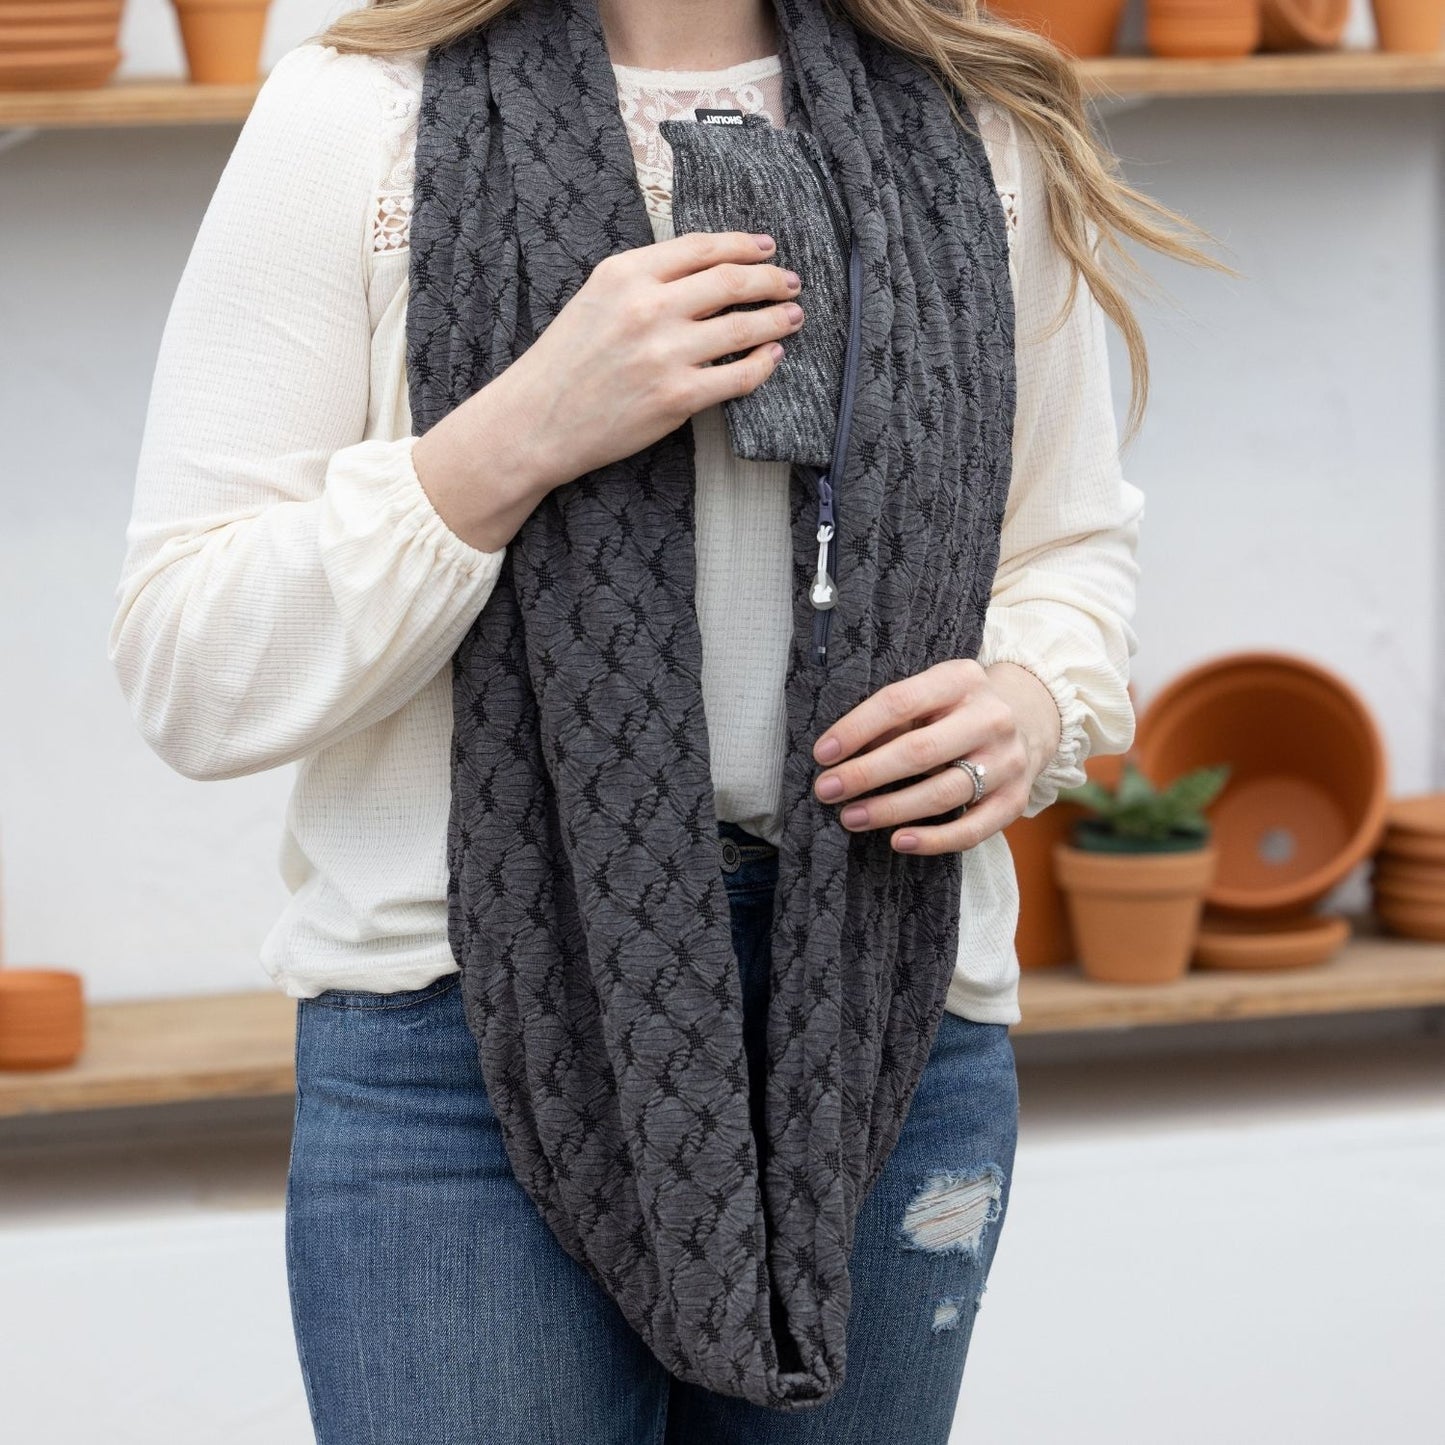 SHOLDIT Convertible Infinity Scarf with Pocket Mystic Grey shown long